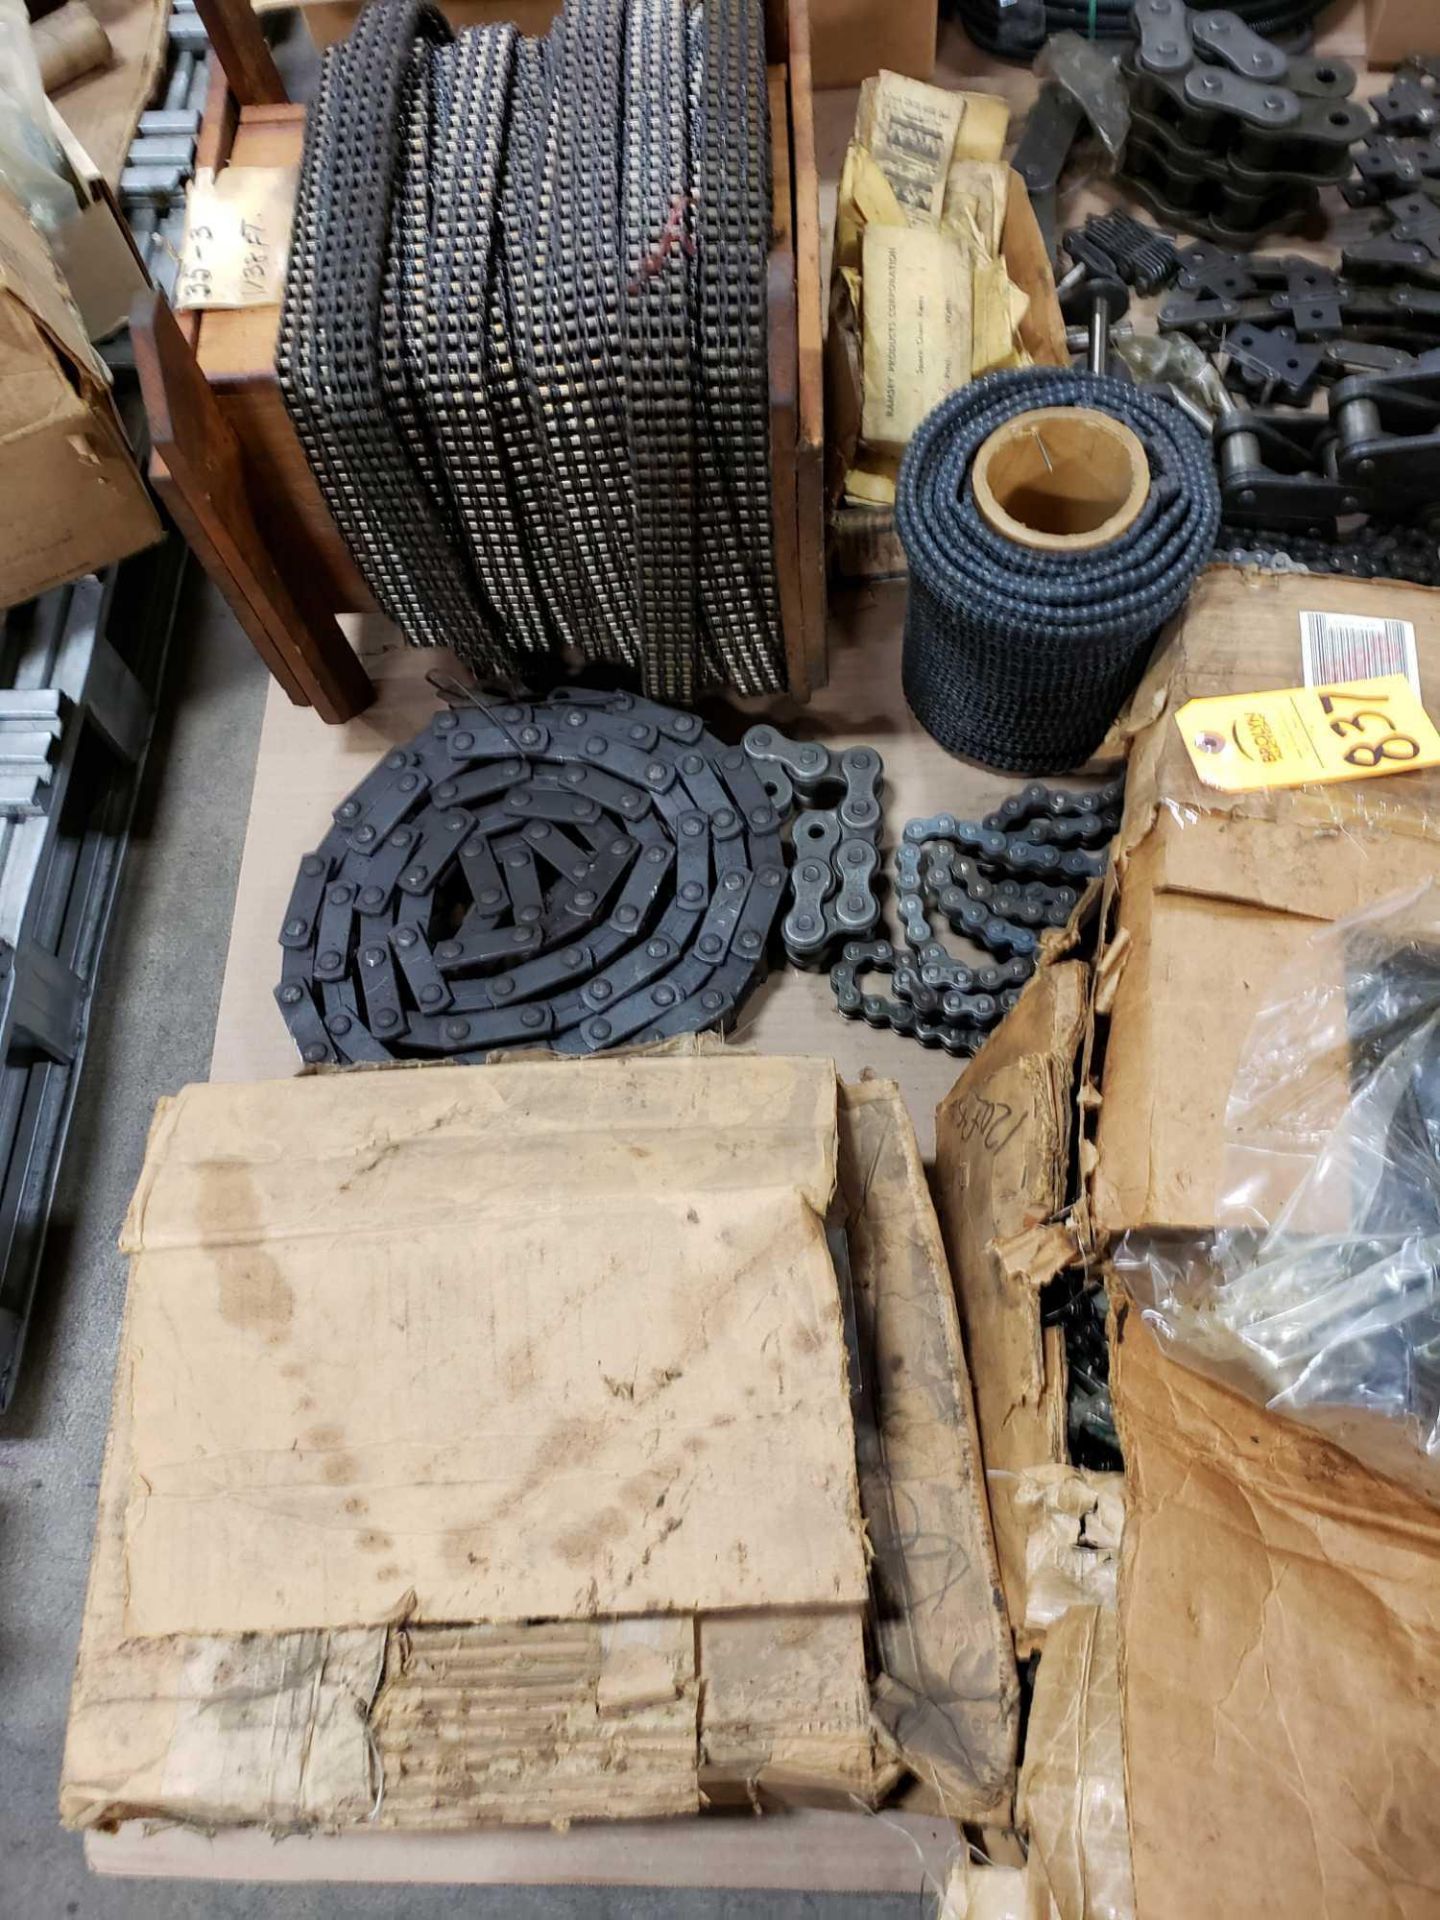 Pallet of assorted chain. Most appear new. - Image 3 of 4